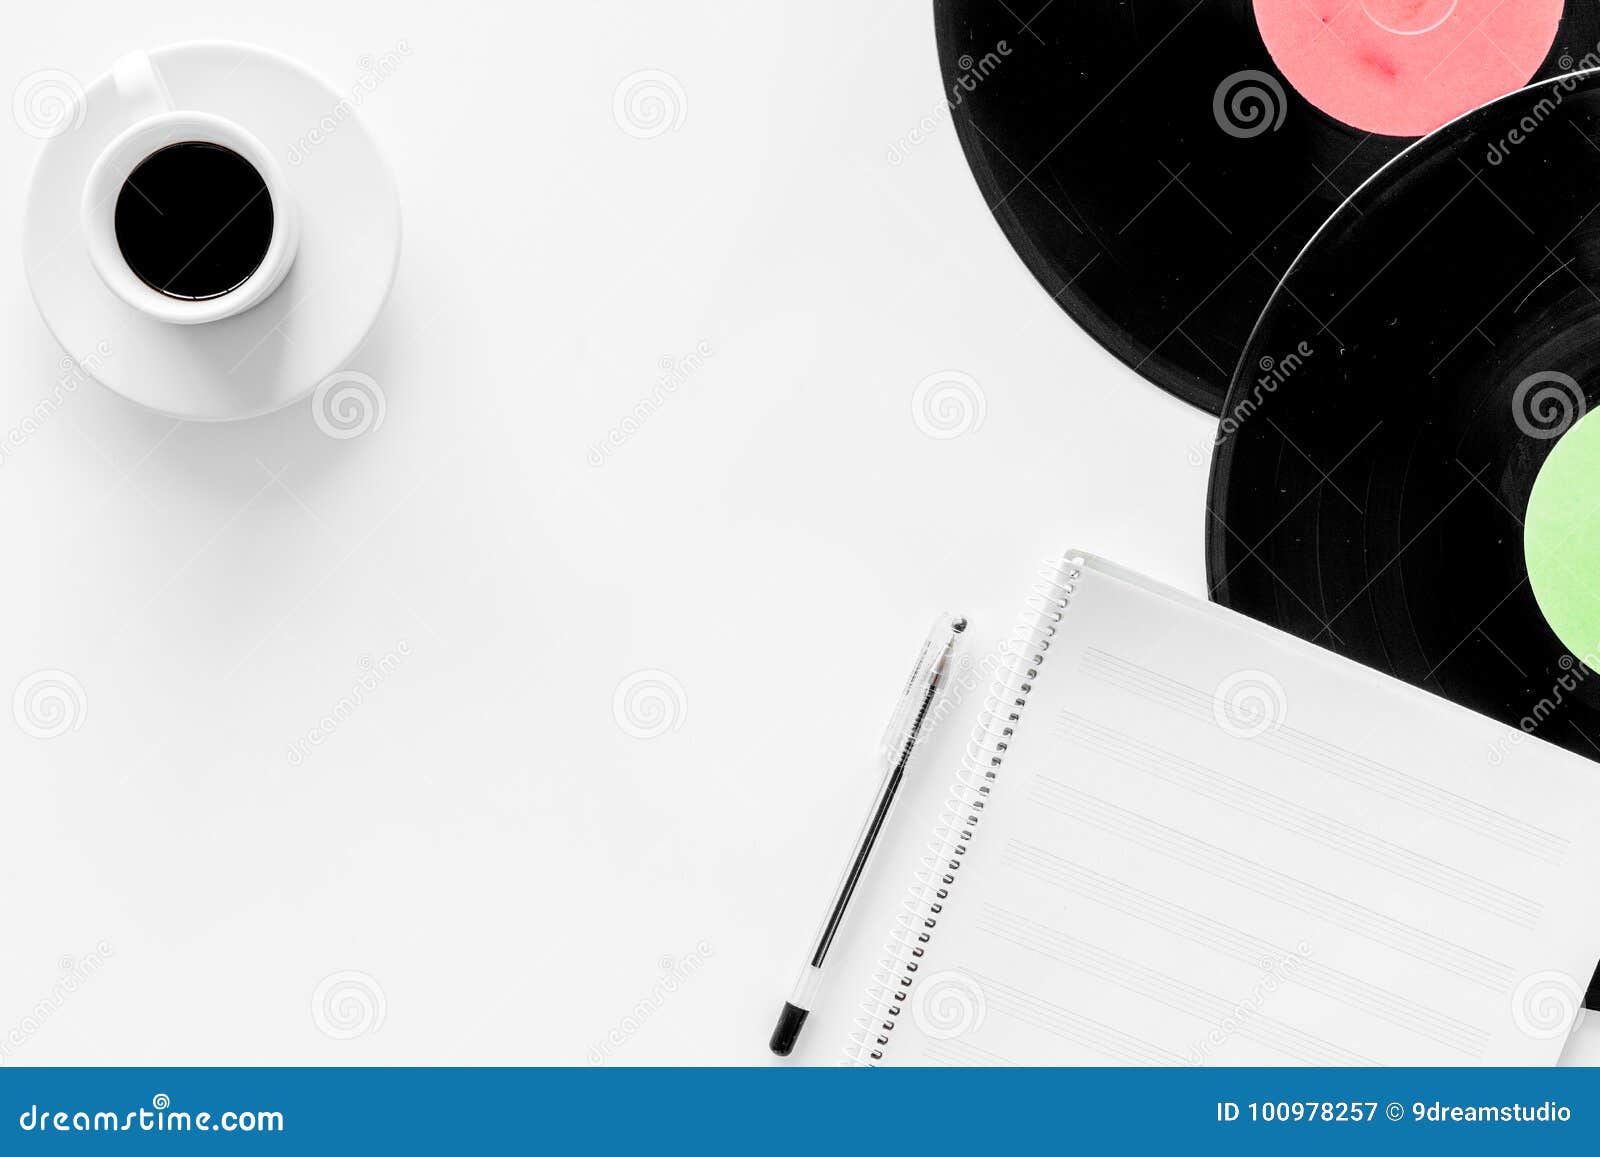 compositor`s workplace. vinyl records and music notes on white background top view copyspace